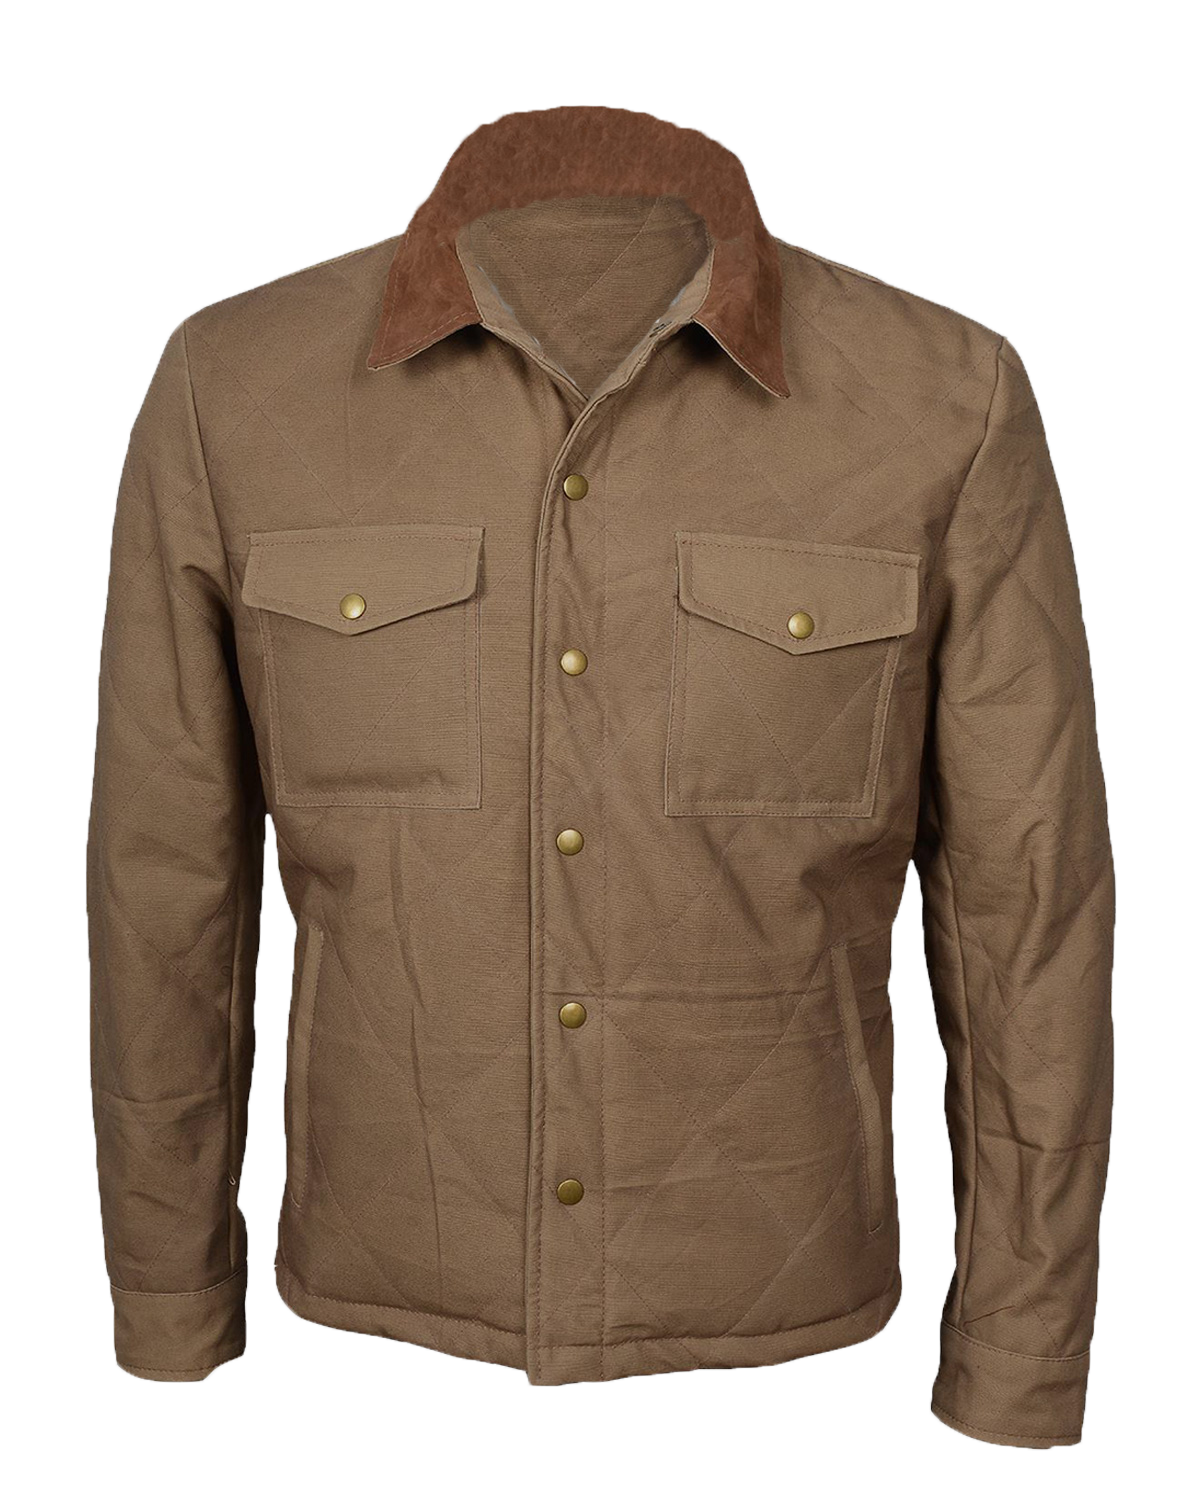 Elite Yellowstone Western Style Waxed Cotton Quilted Jacket